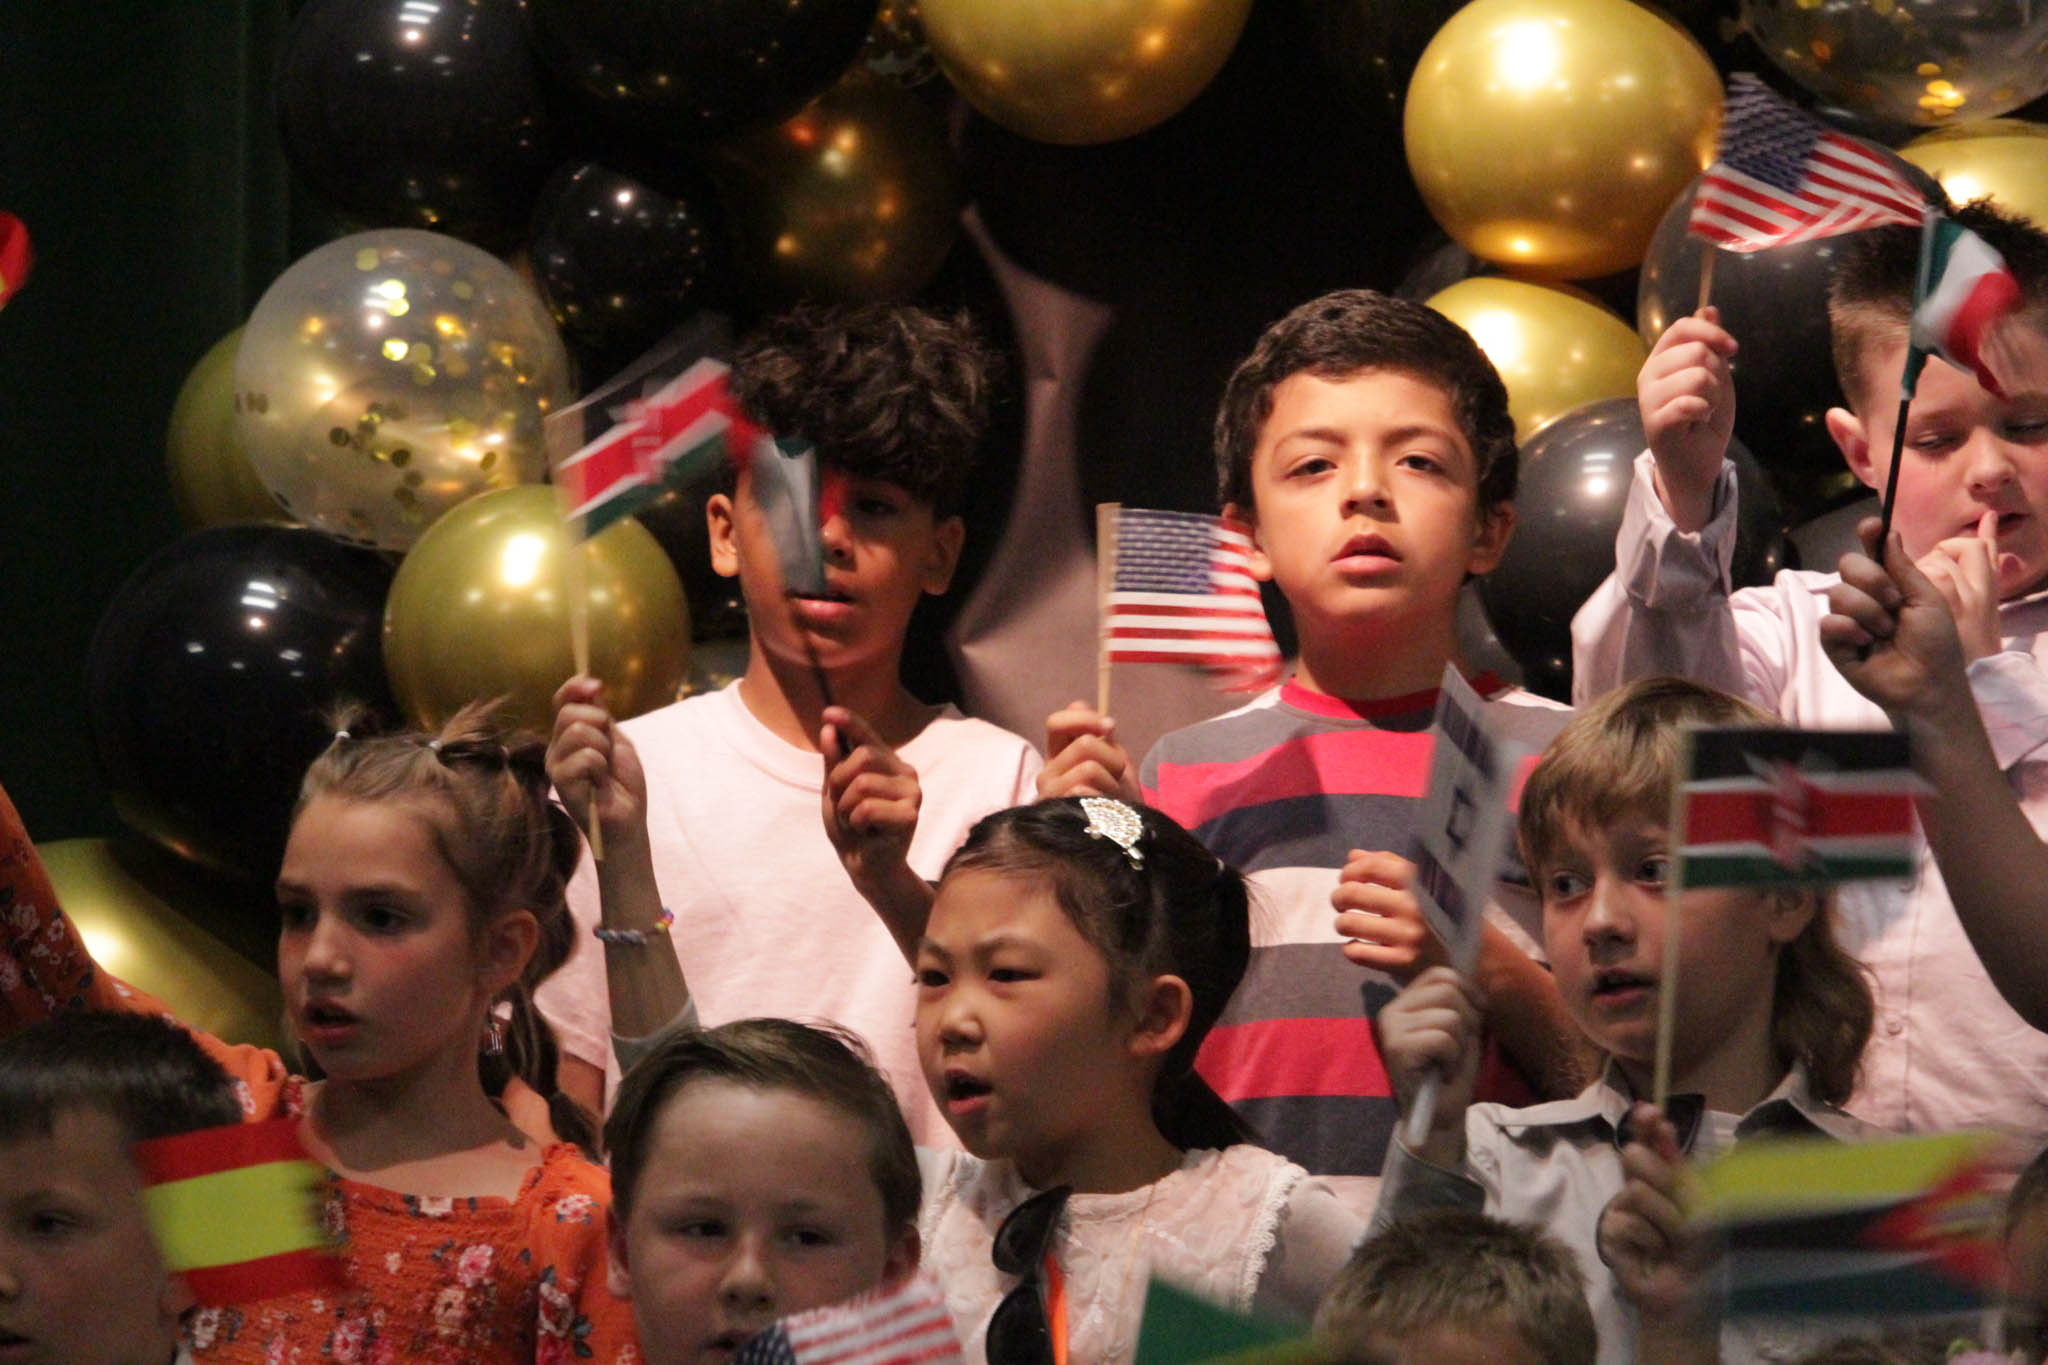 Second grade students with flags.